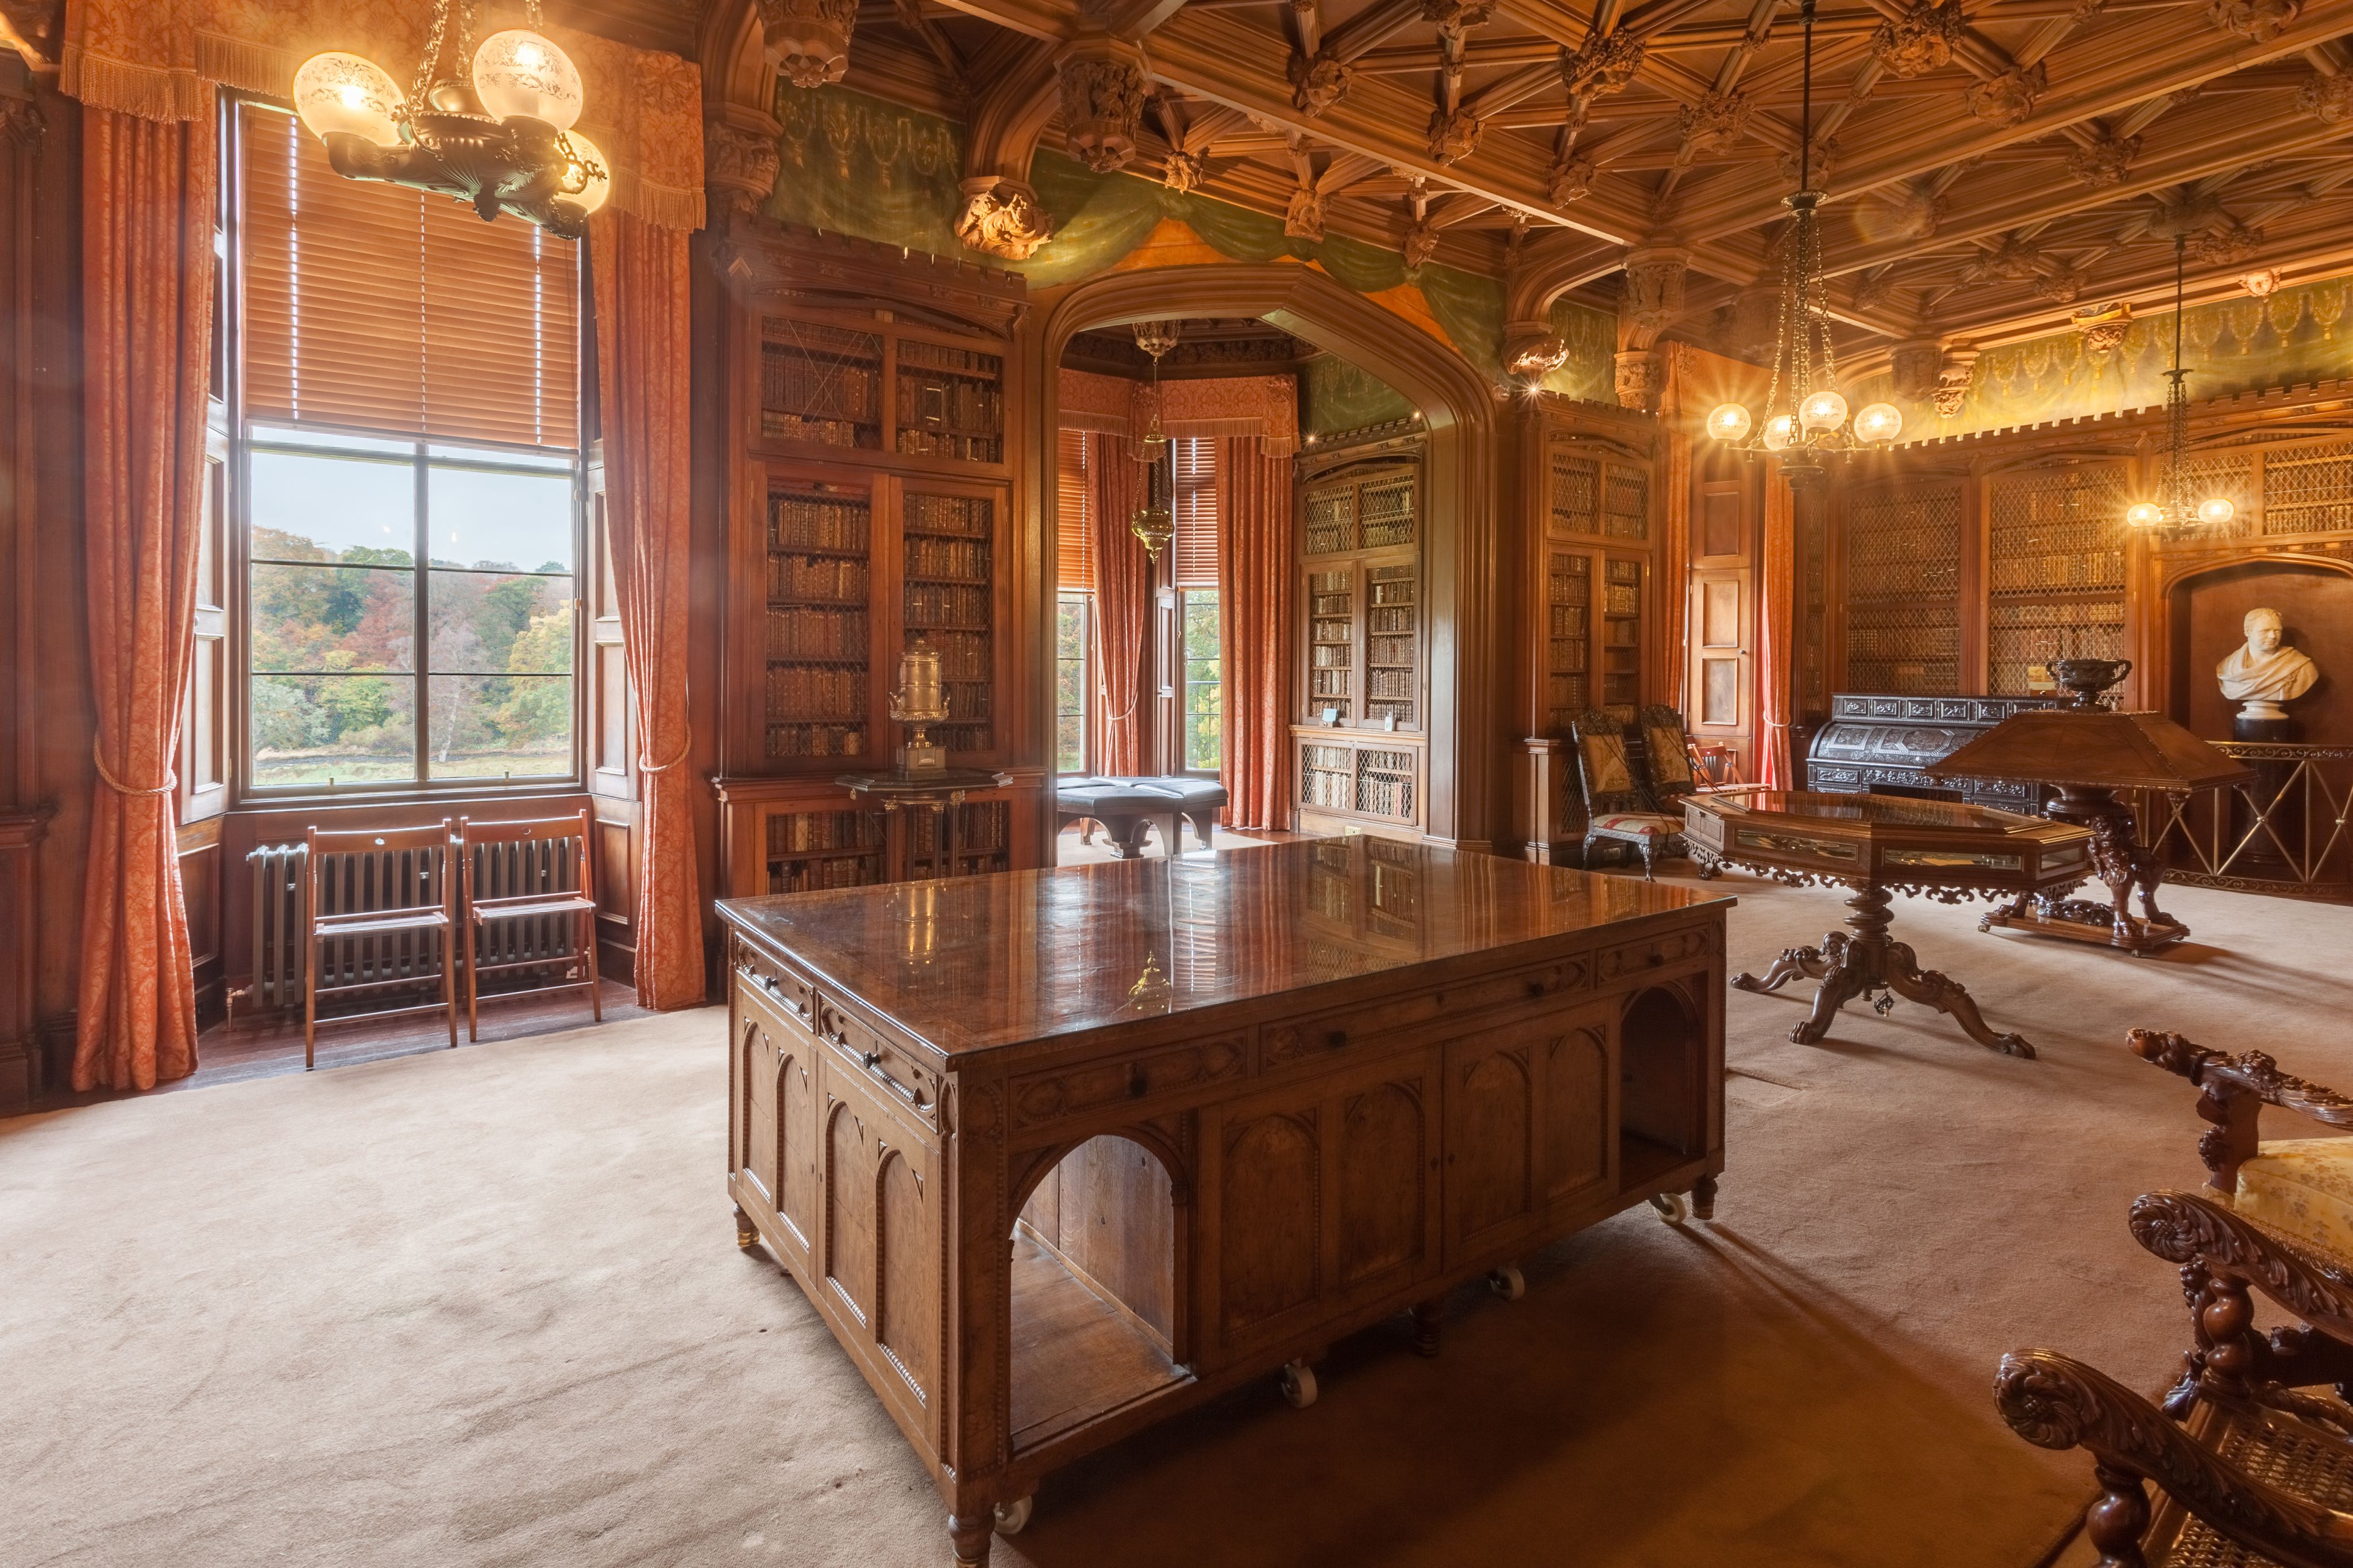 The library in Scott’s home, Abbotsford: a large, book-lined room with windows through which trees can be seen.